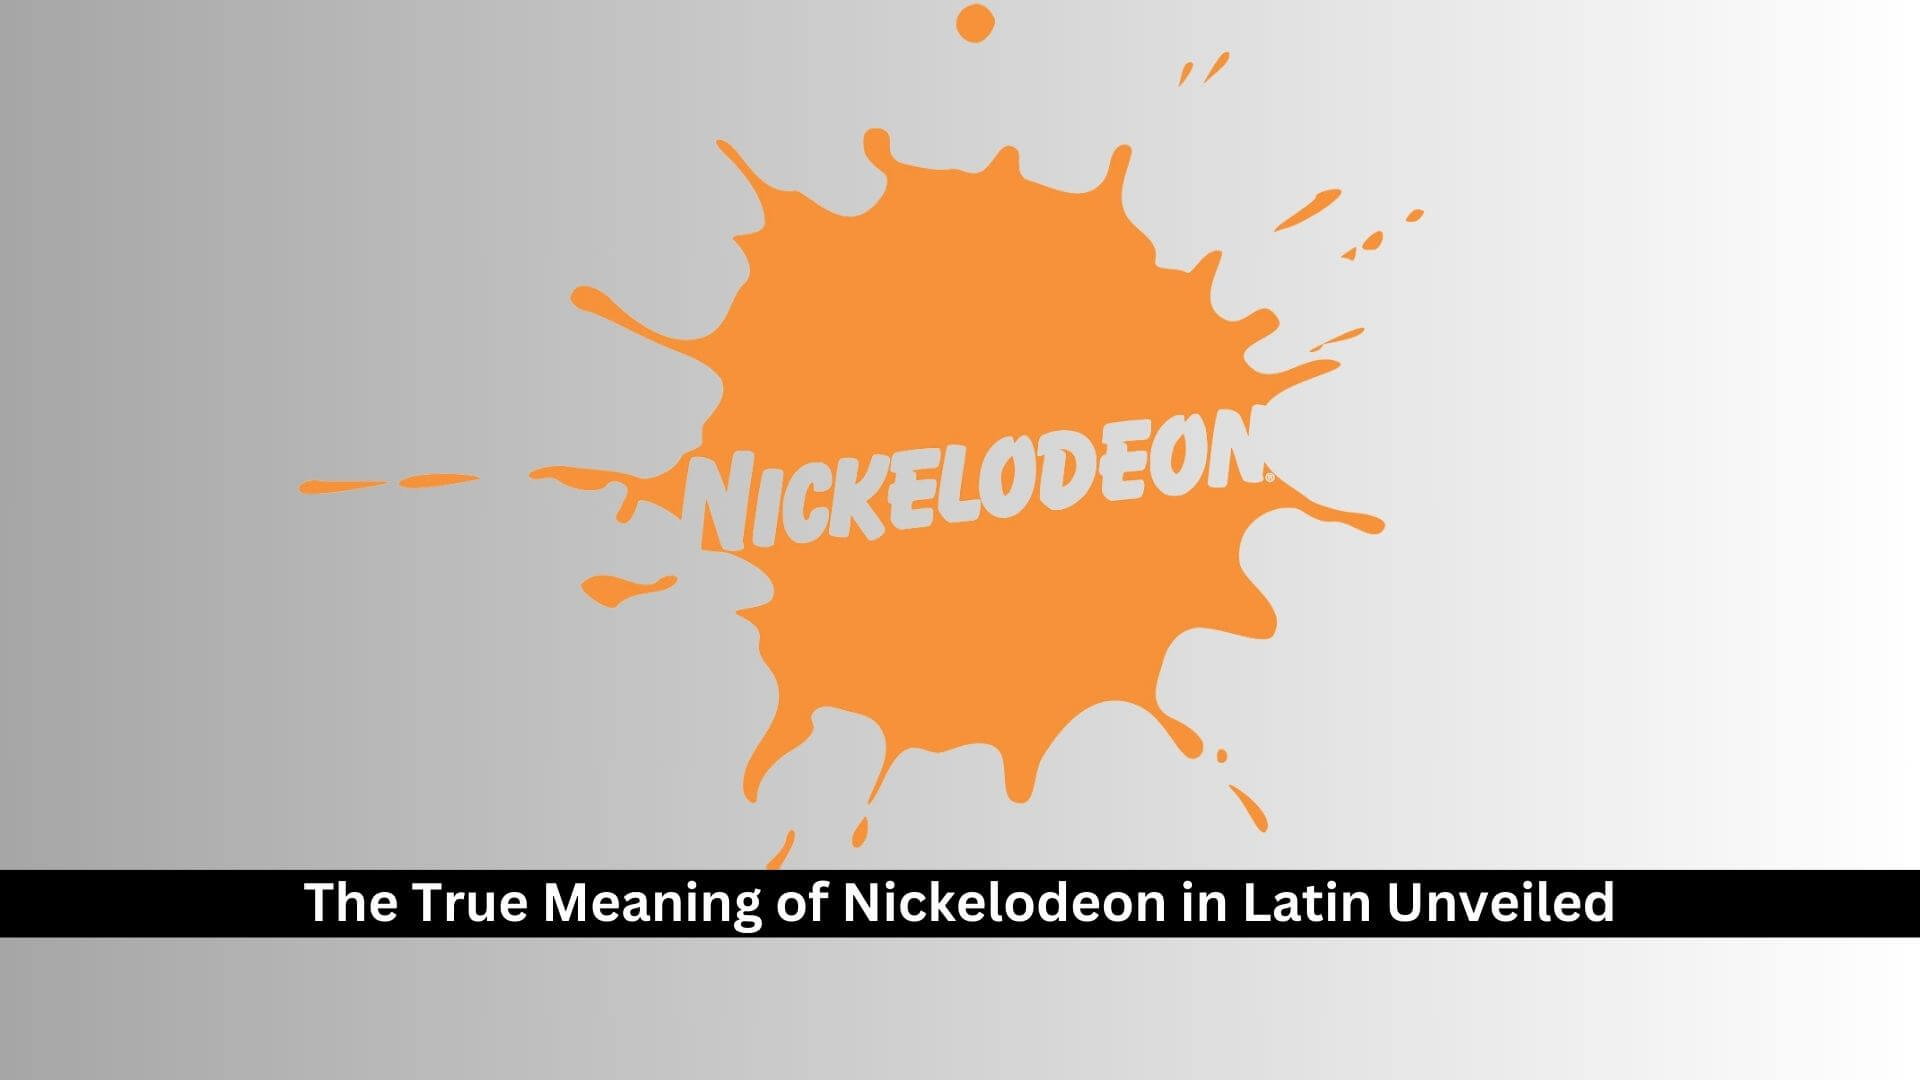 The True Meaning of Nickelodeon in Latin Unveiled